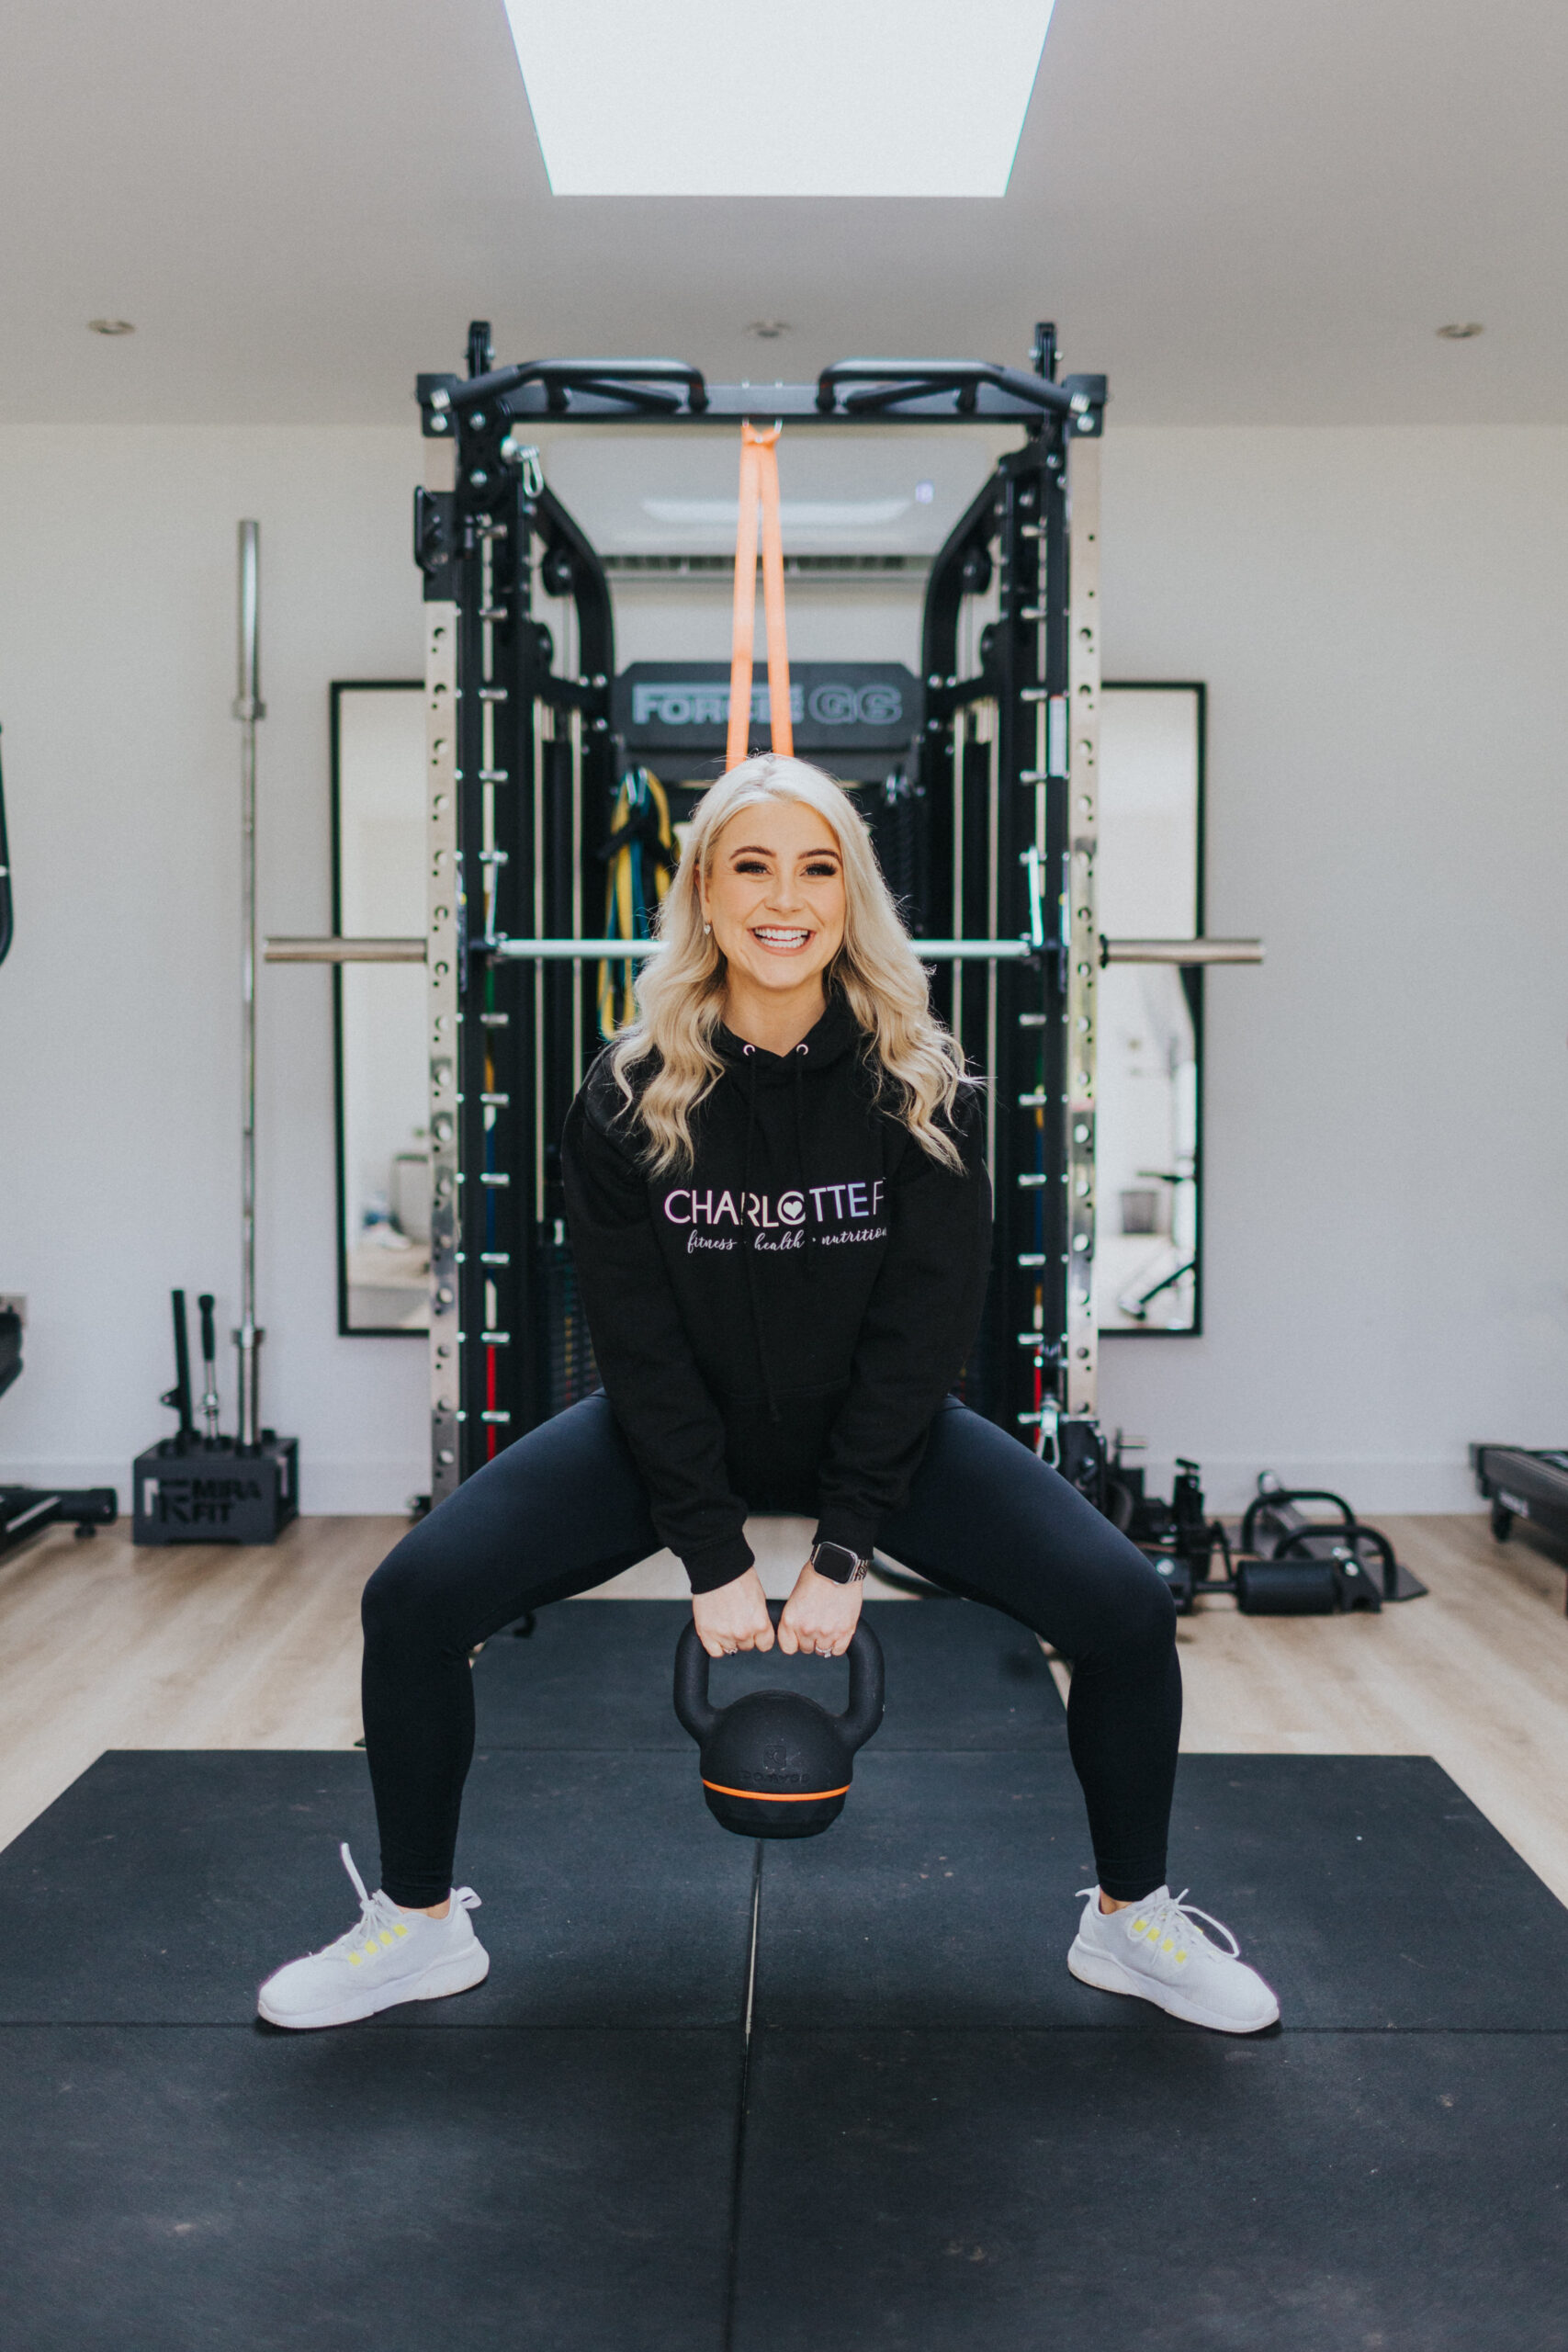 CharlotteFit's strategy for fresh and professional branding